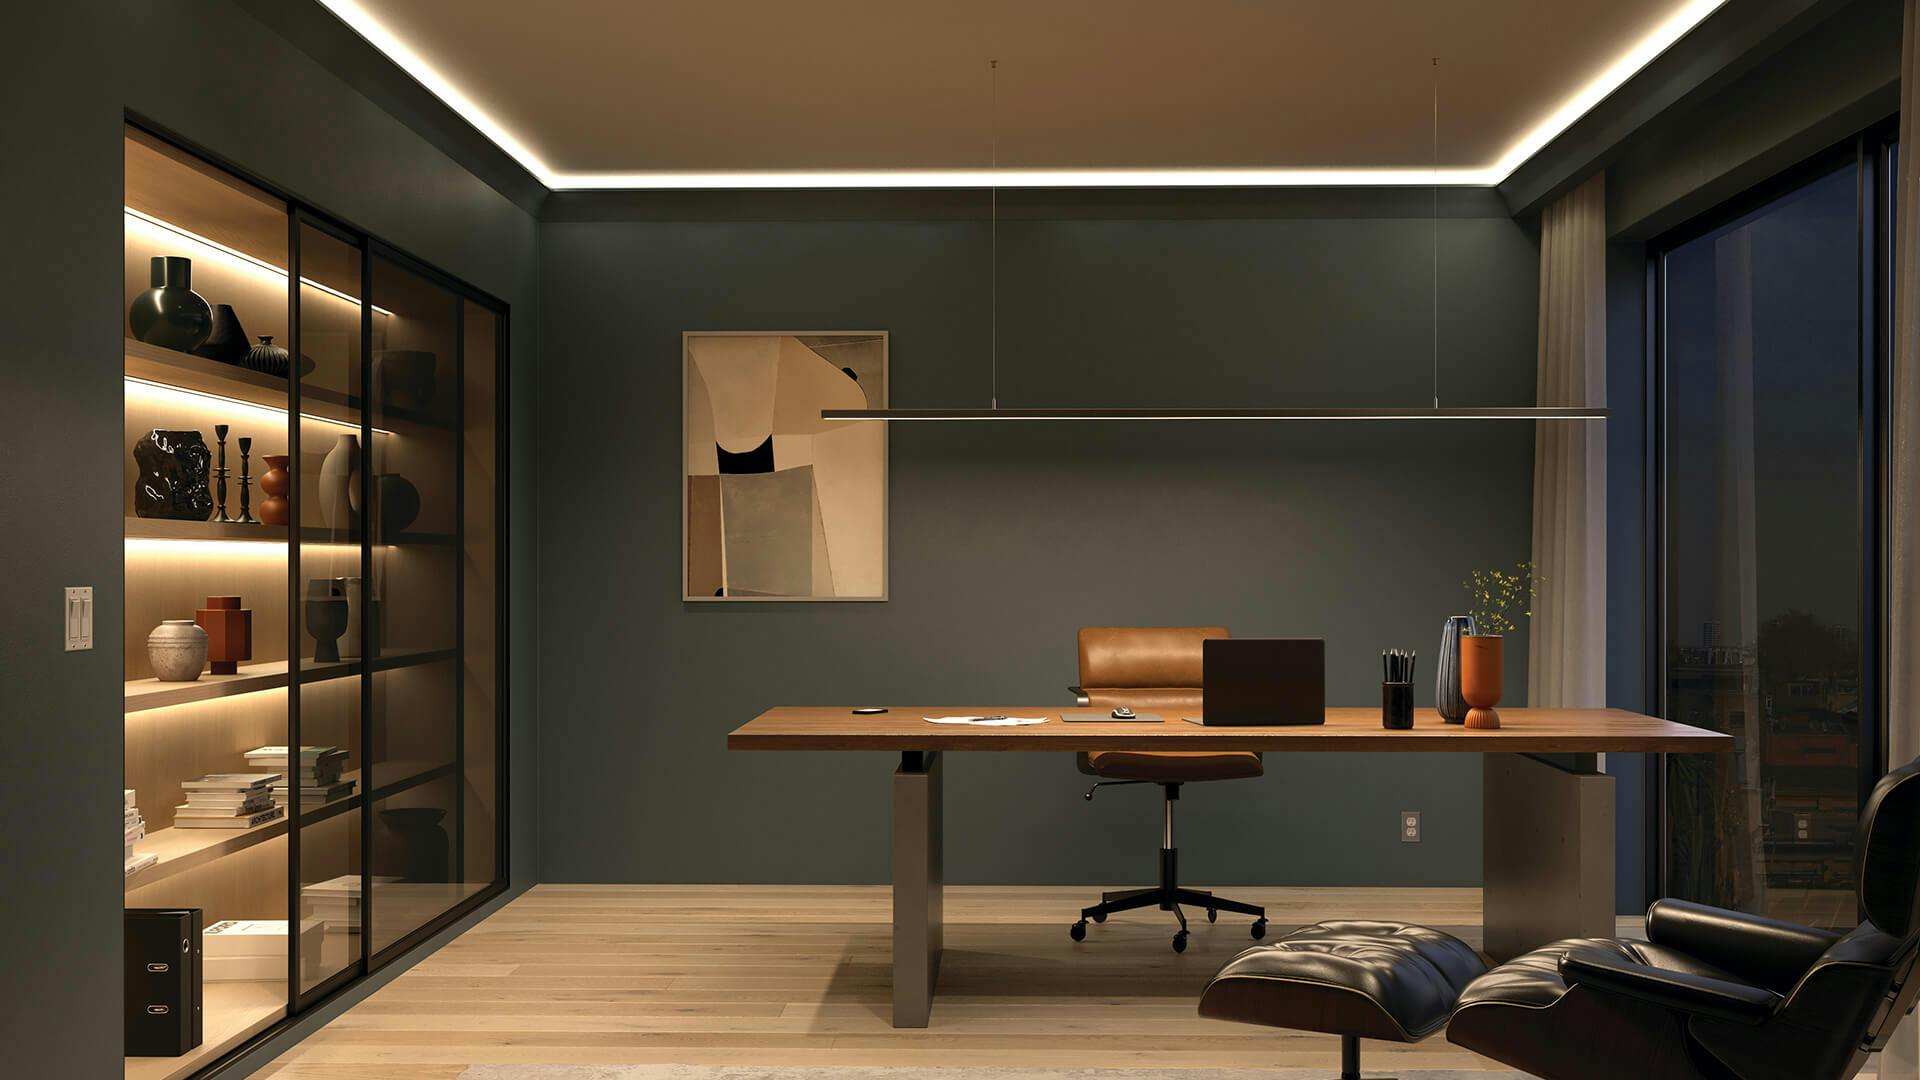  Office at night with channel lighting running along the ceiling trim